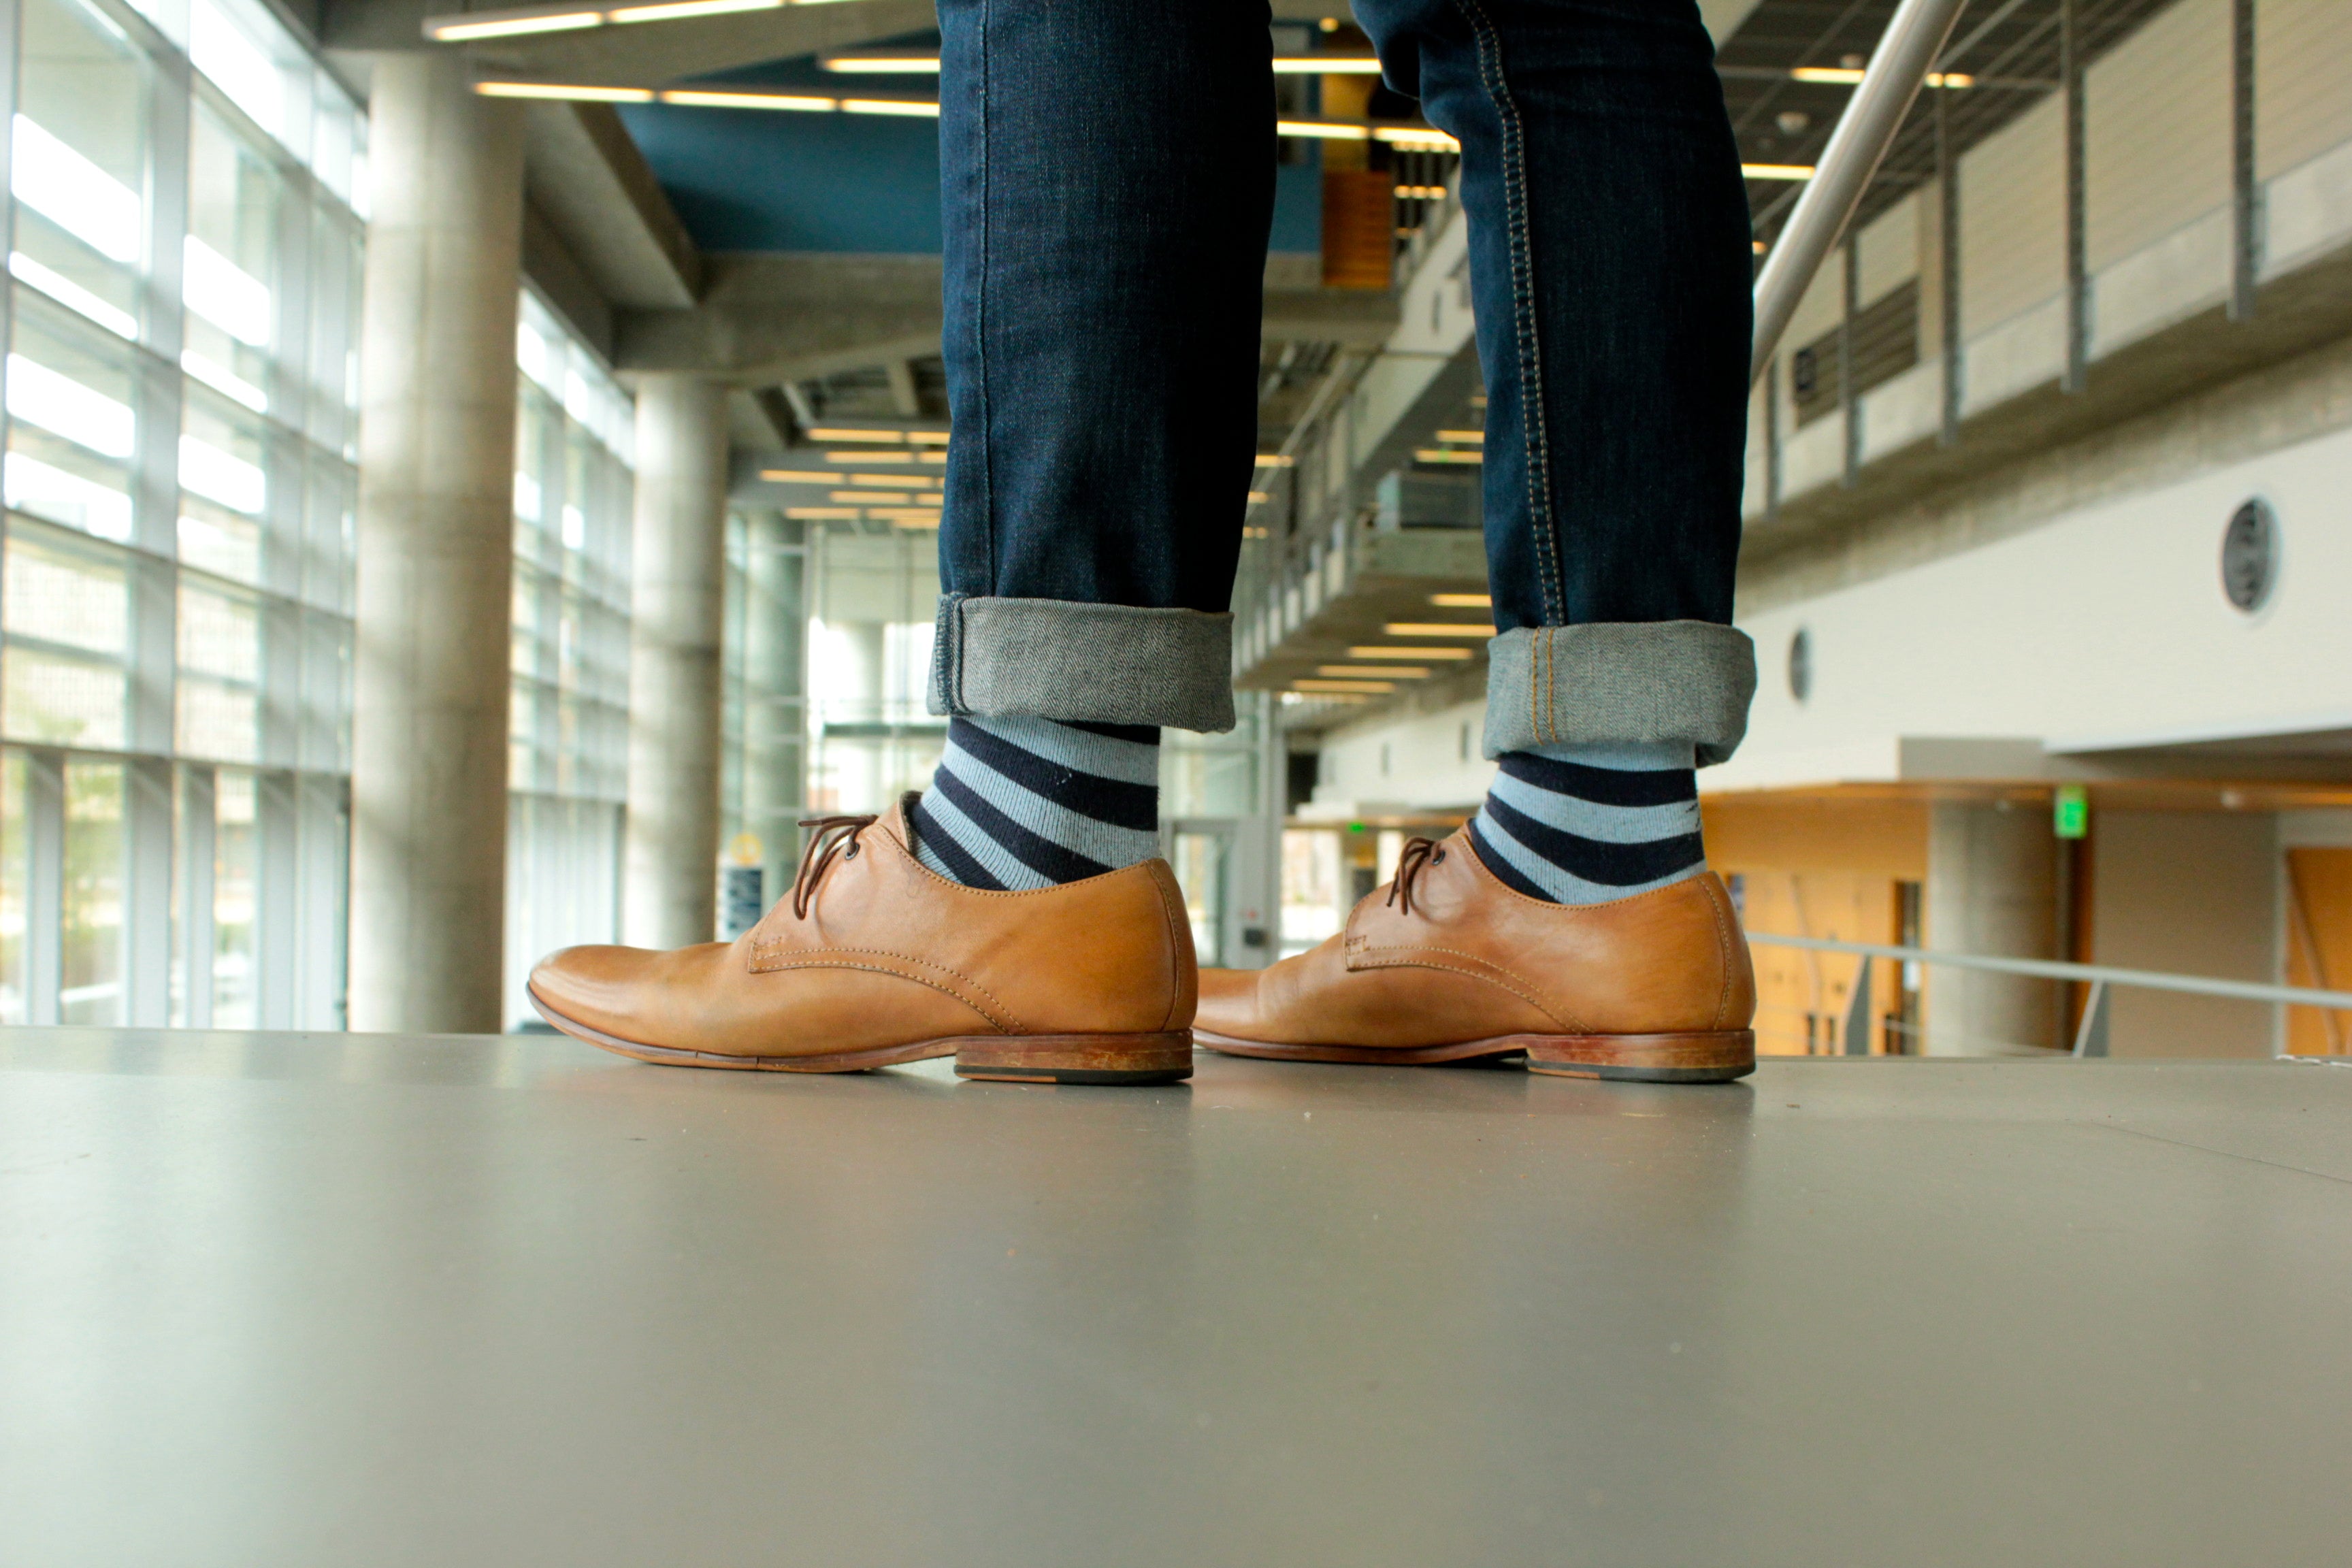 navy blue and light blue striped over the calf dress socks, light brown dress shoes, blue jeans